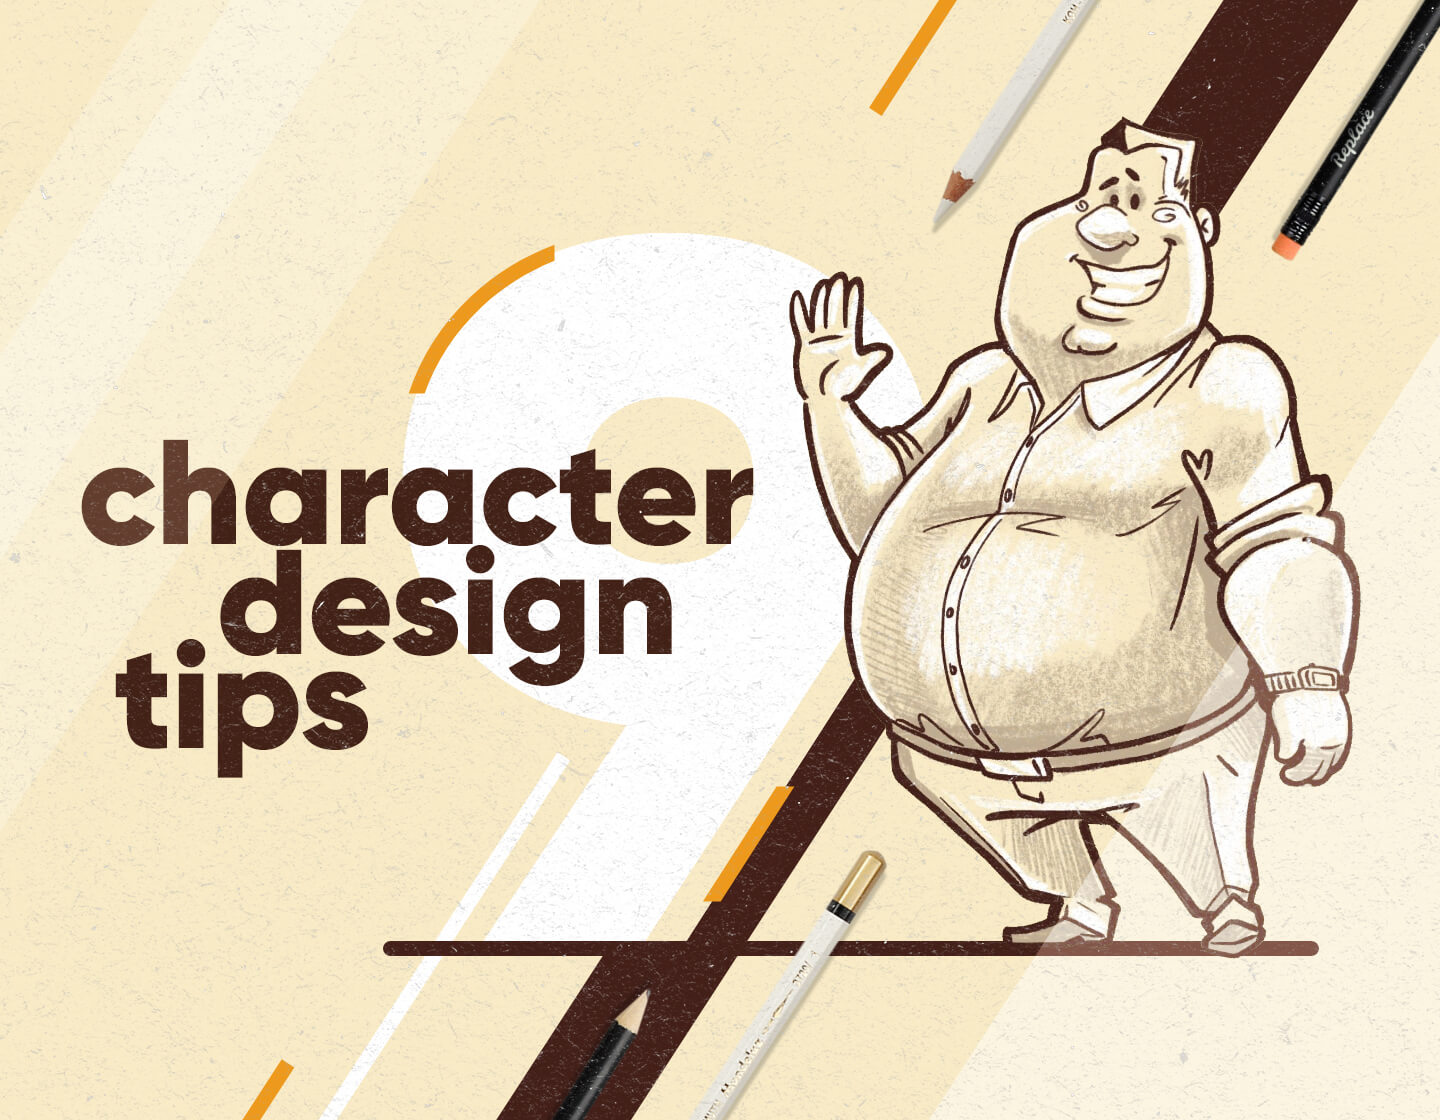 9 Character Design Tips To Help You Think Like a Professional